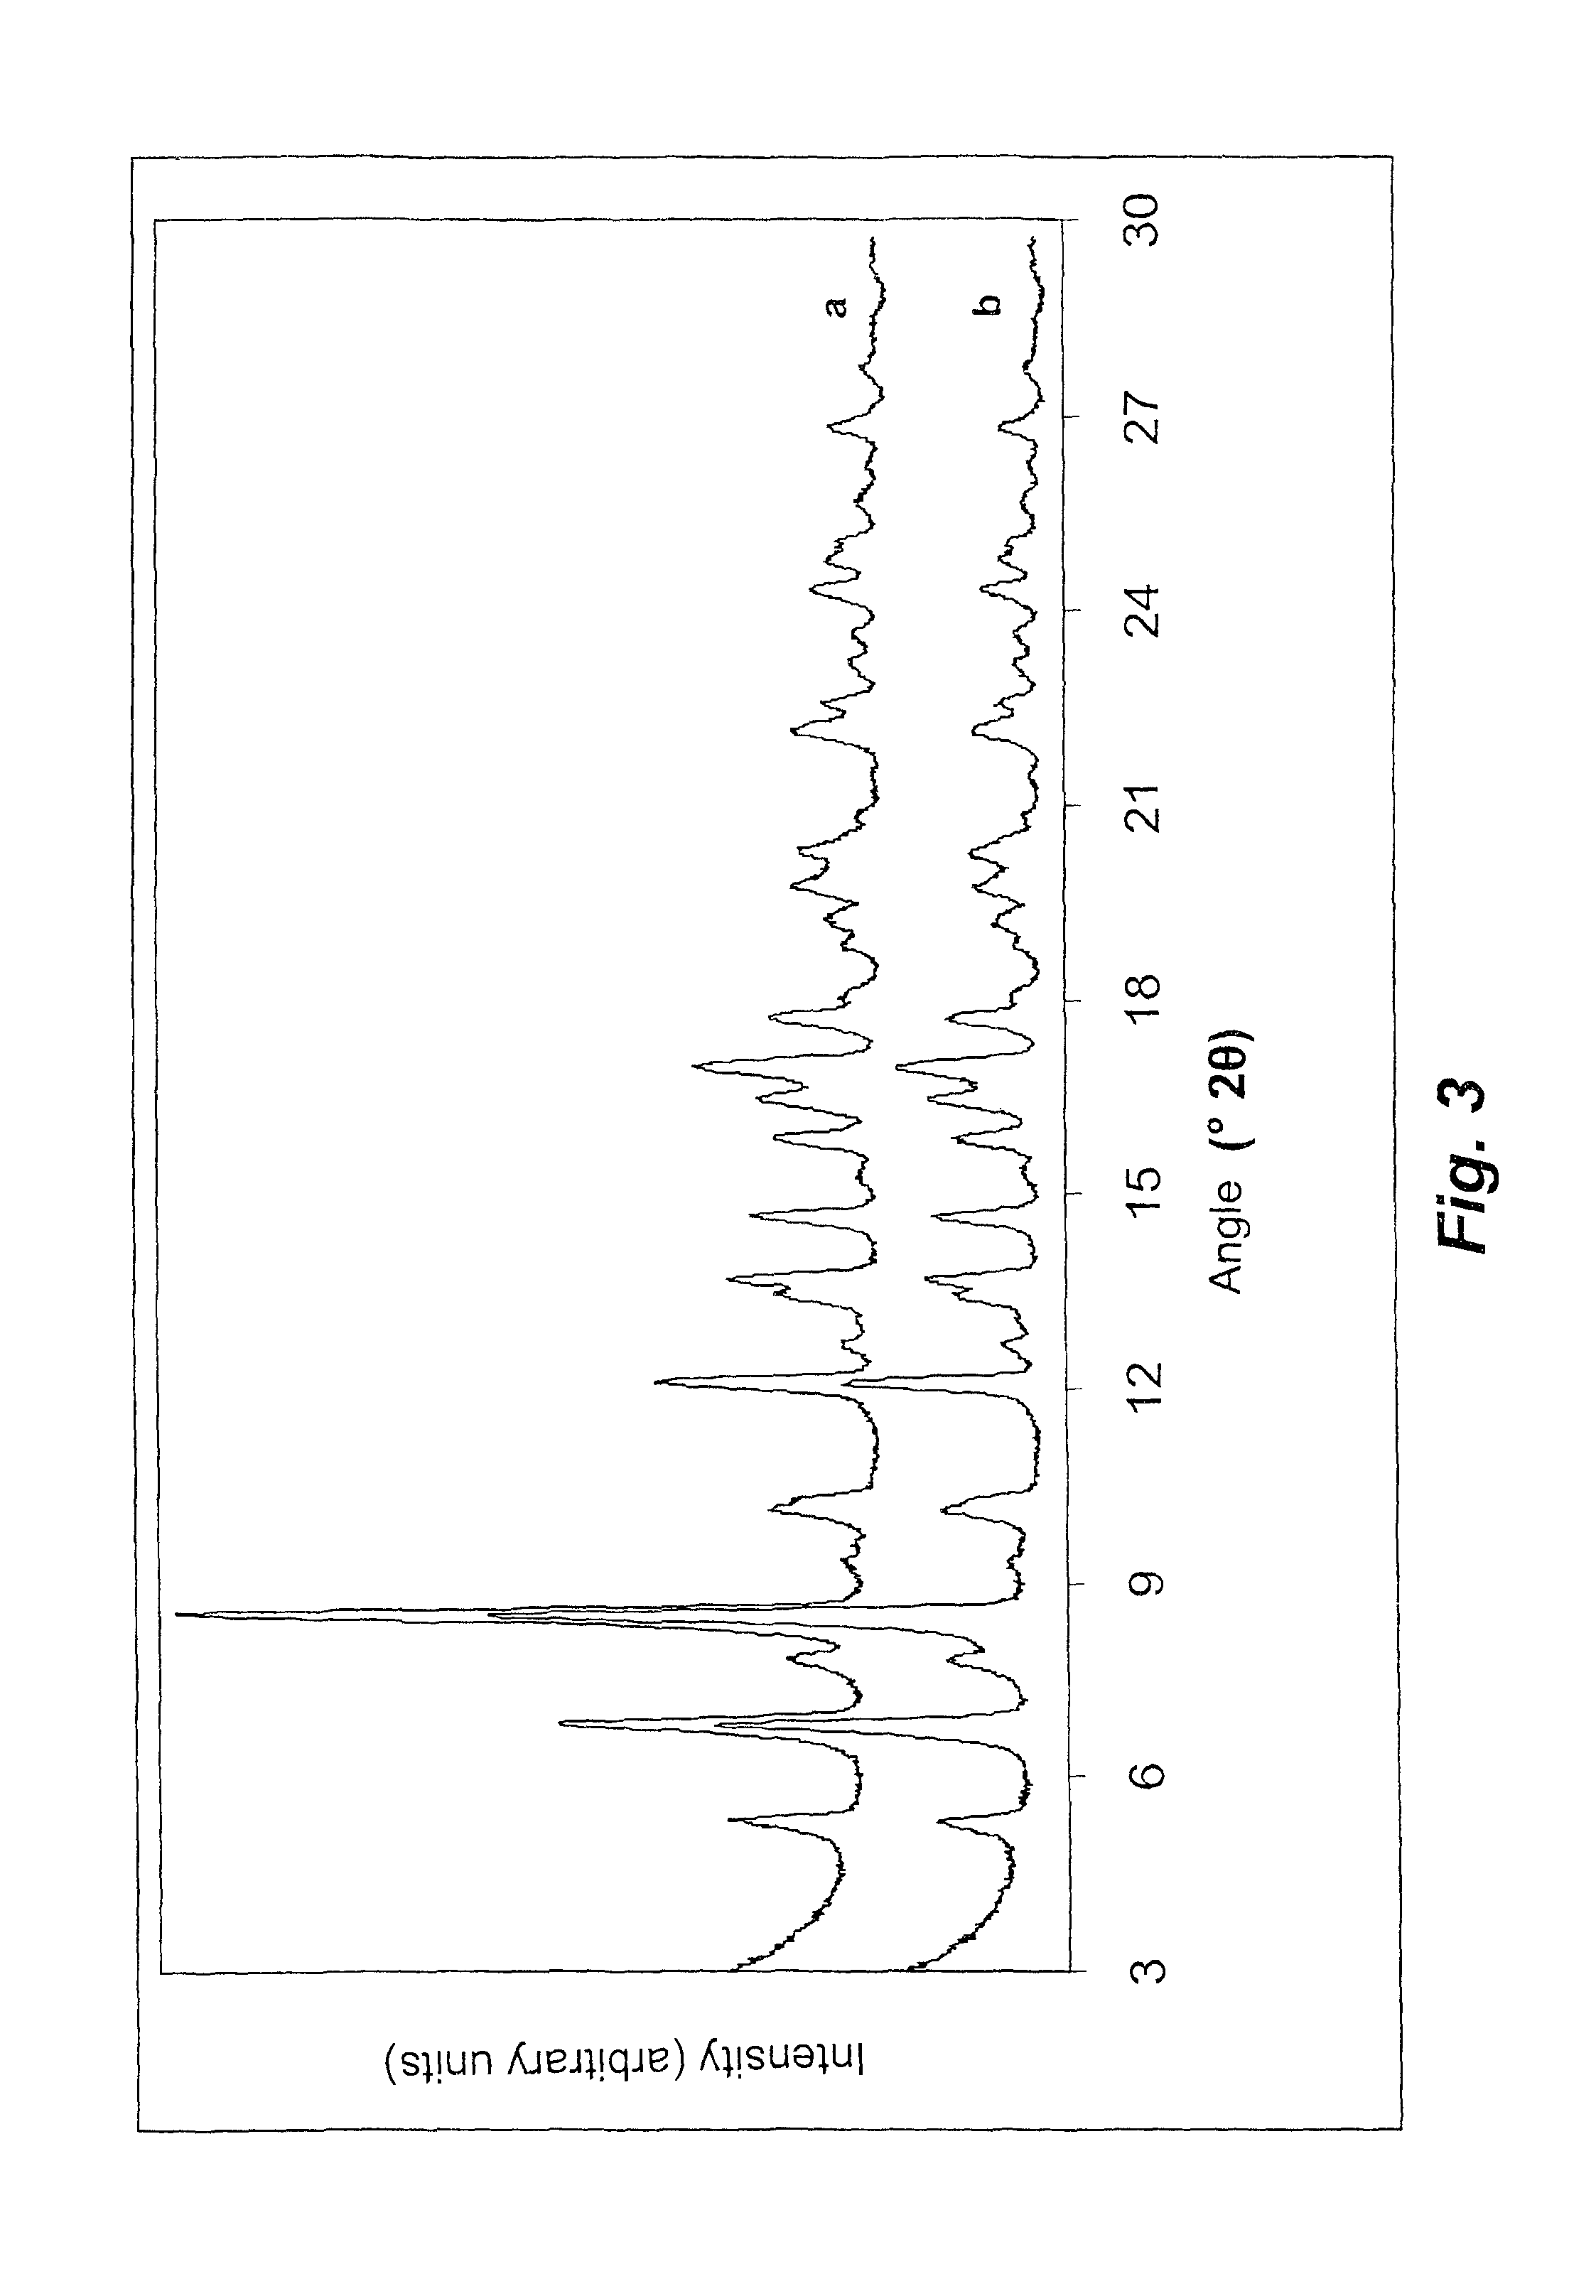 Polymorph of rifaximin and process for the preparation thereof